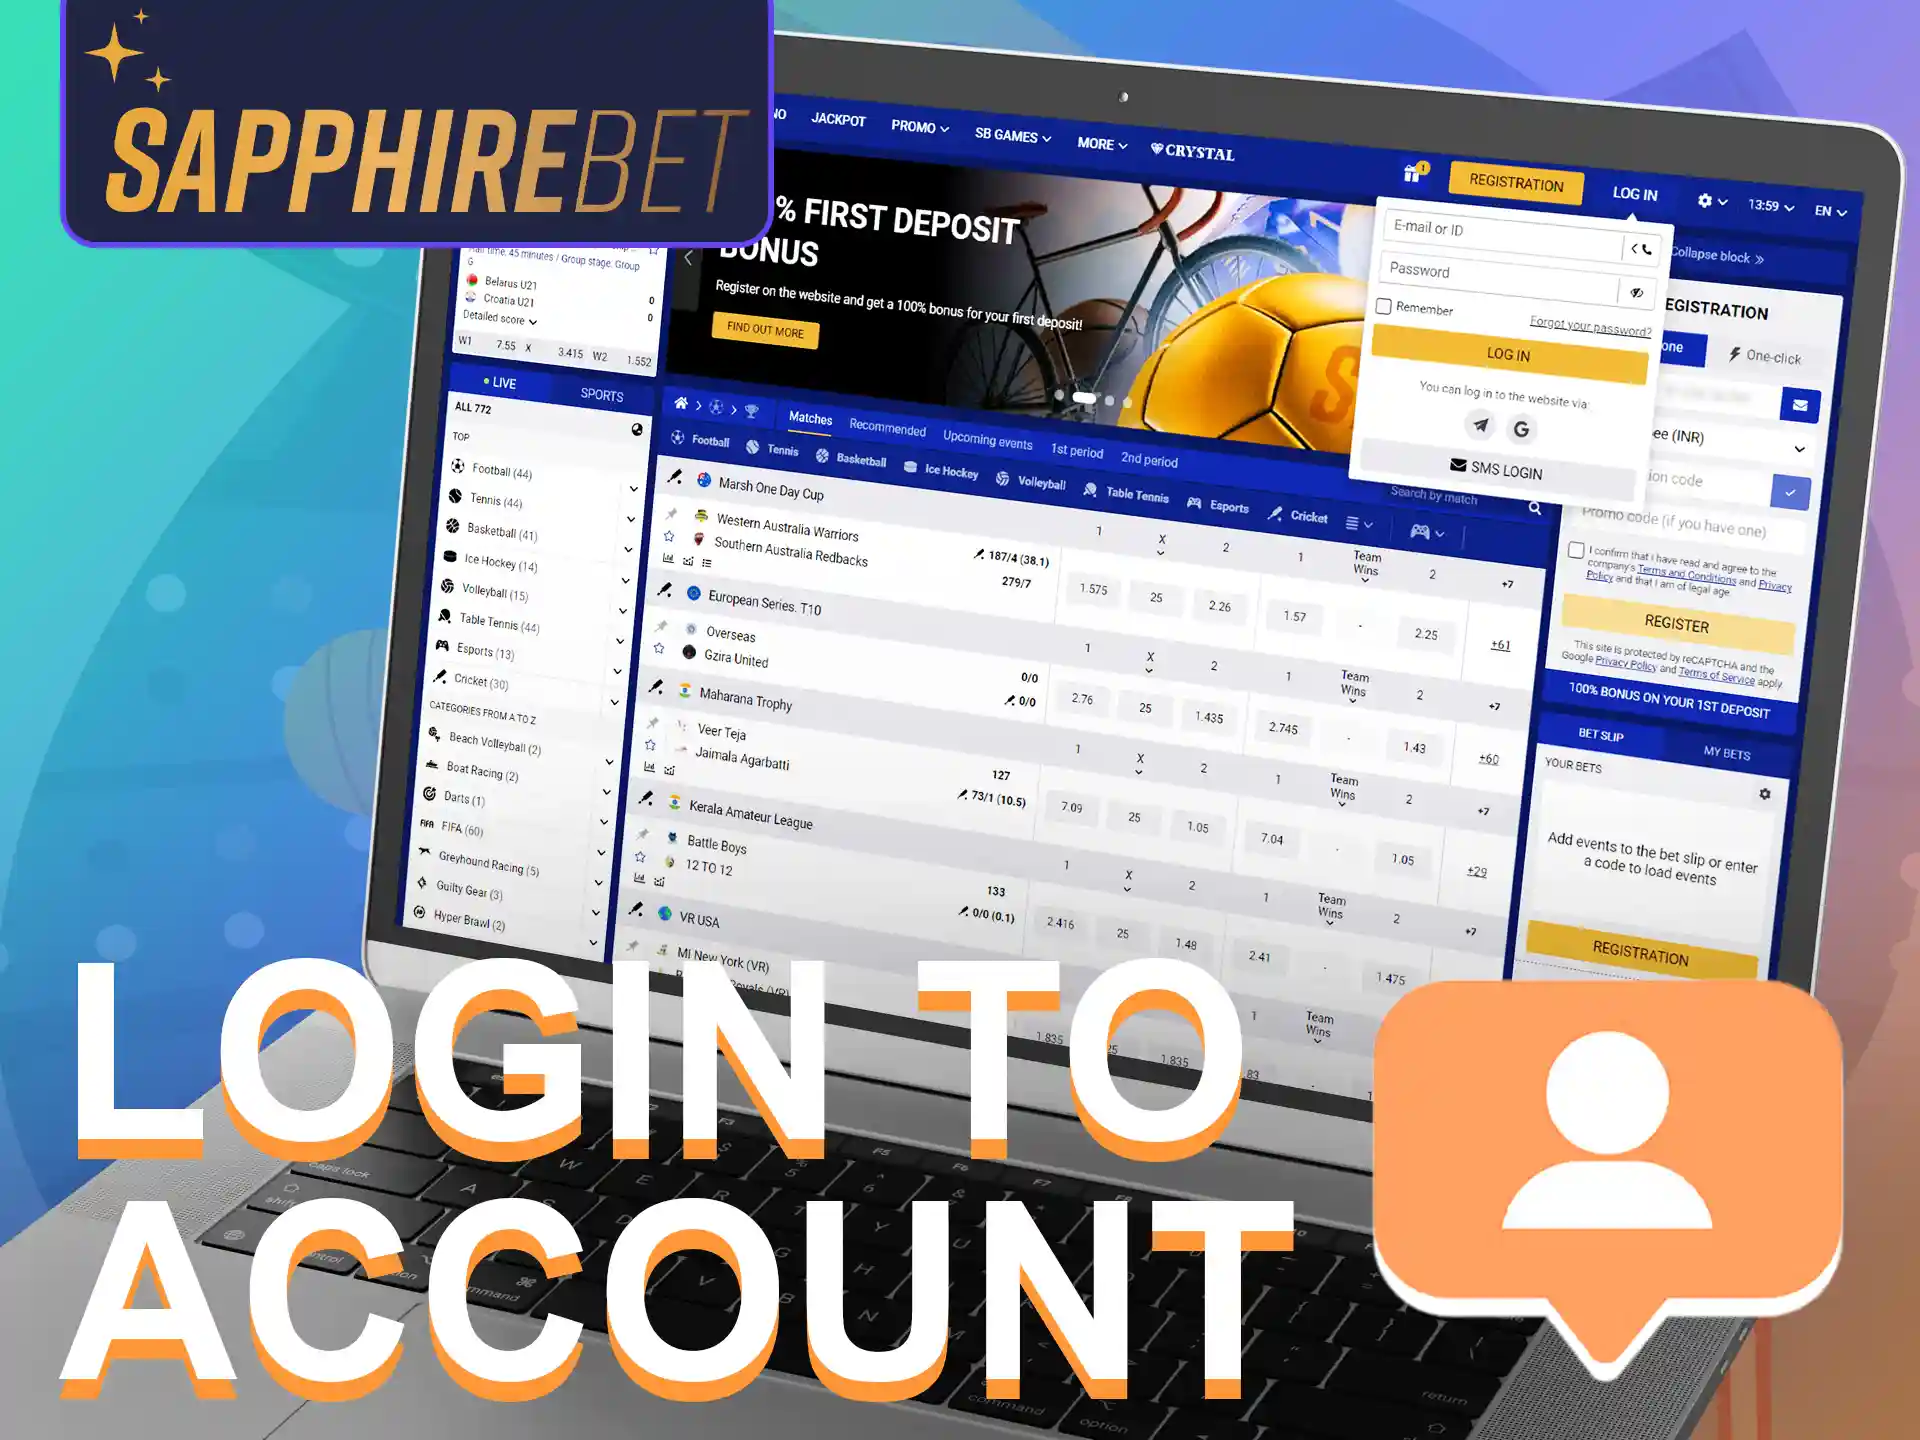 Log in to your SapphireBet account through the official SapphireBet website.